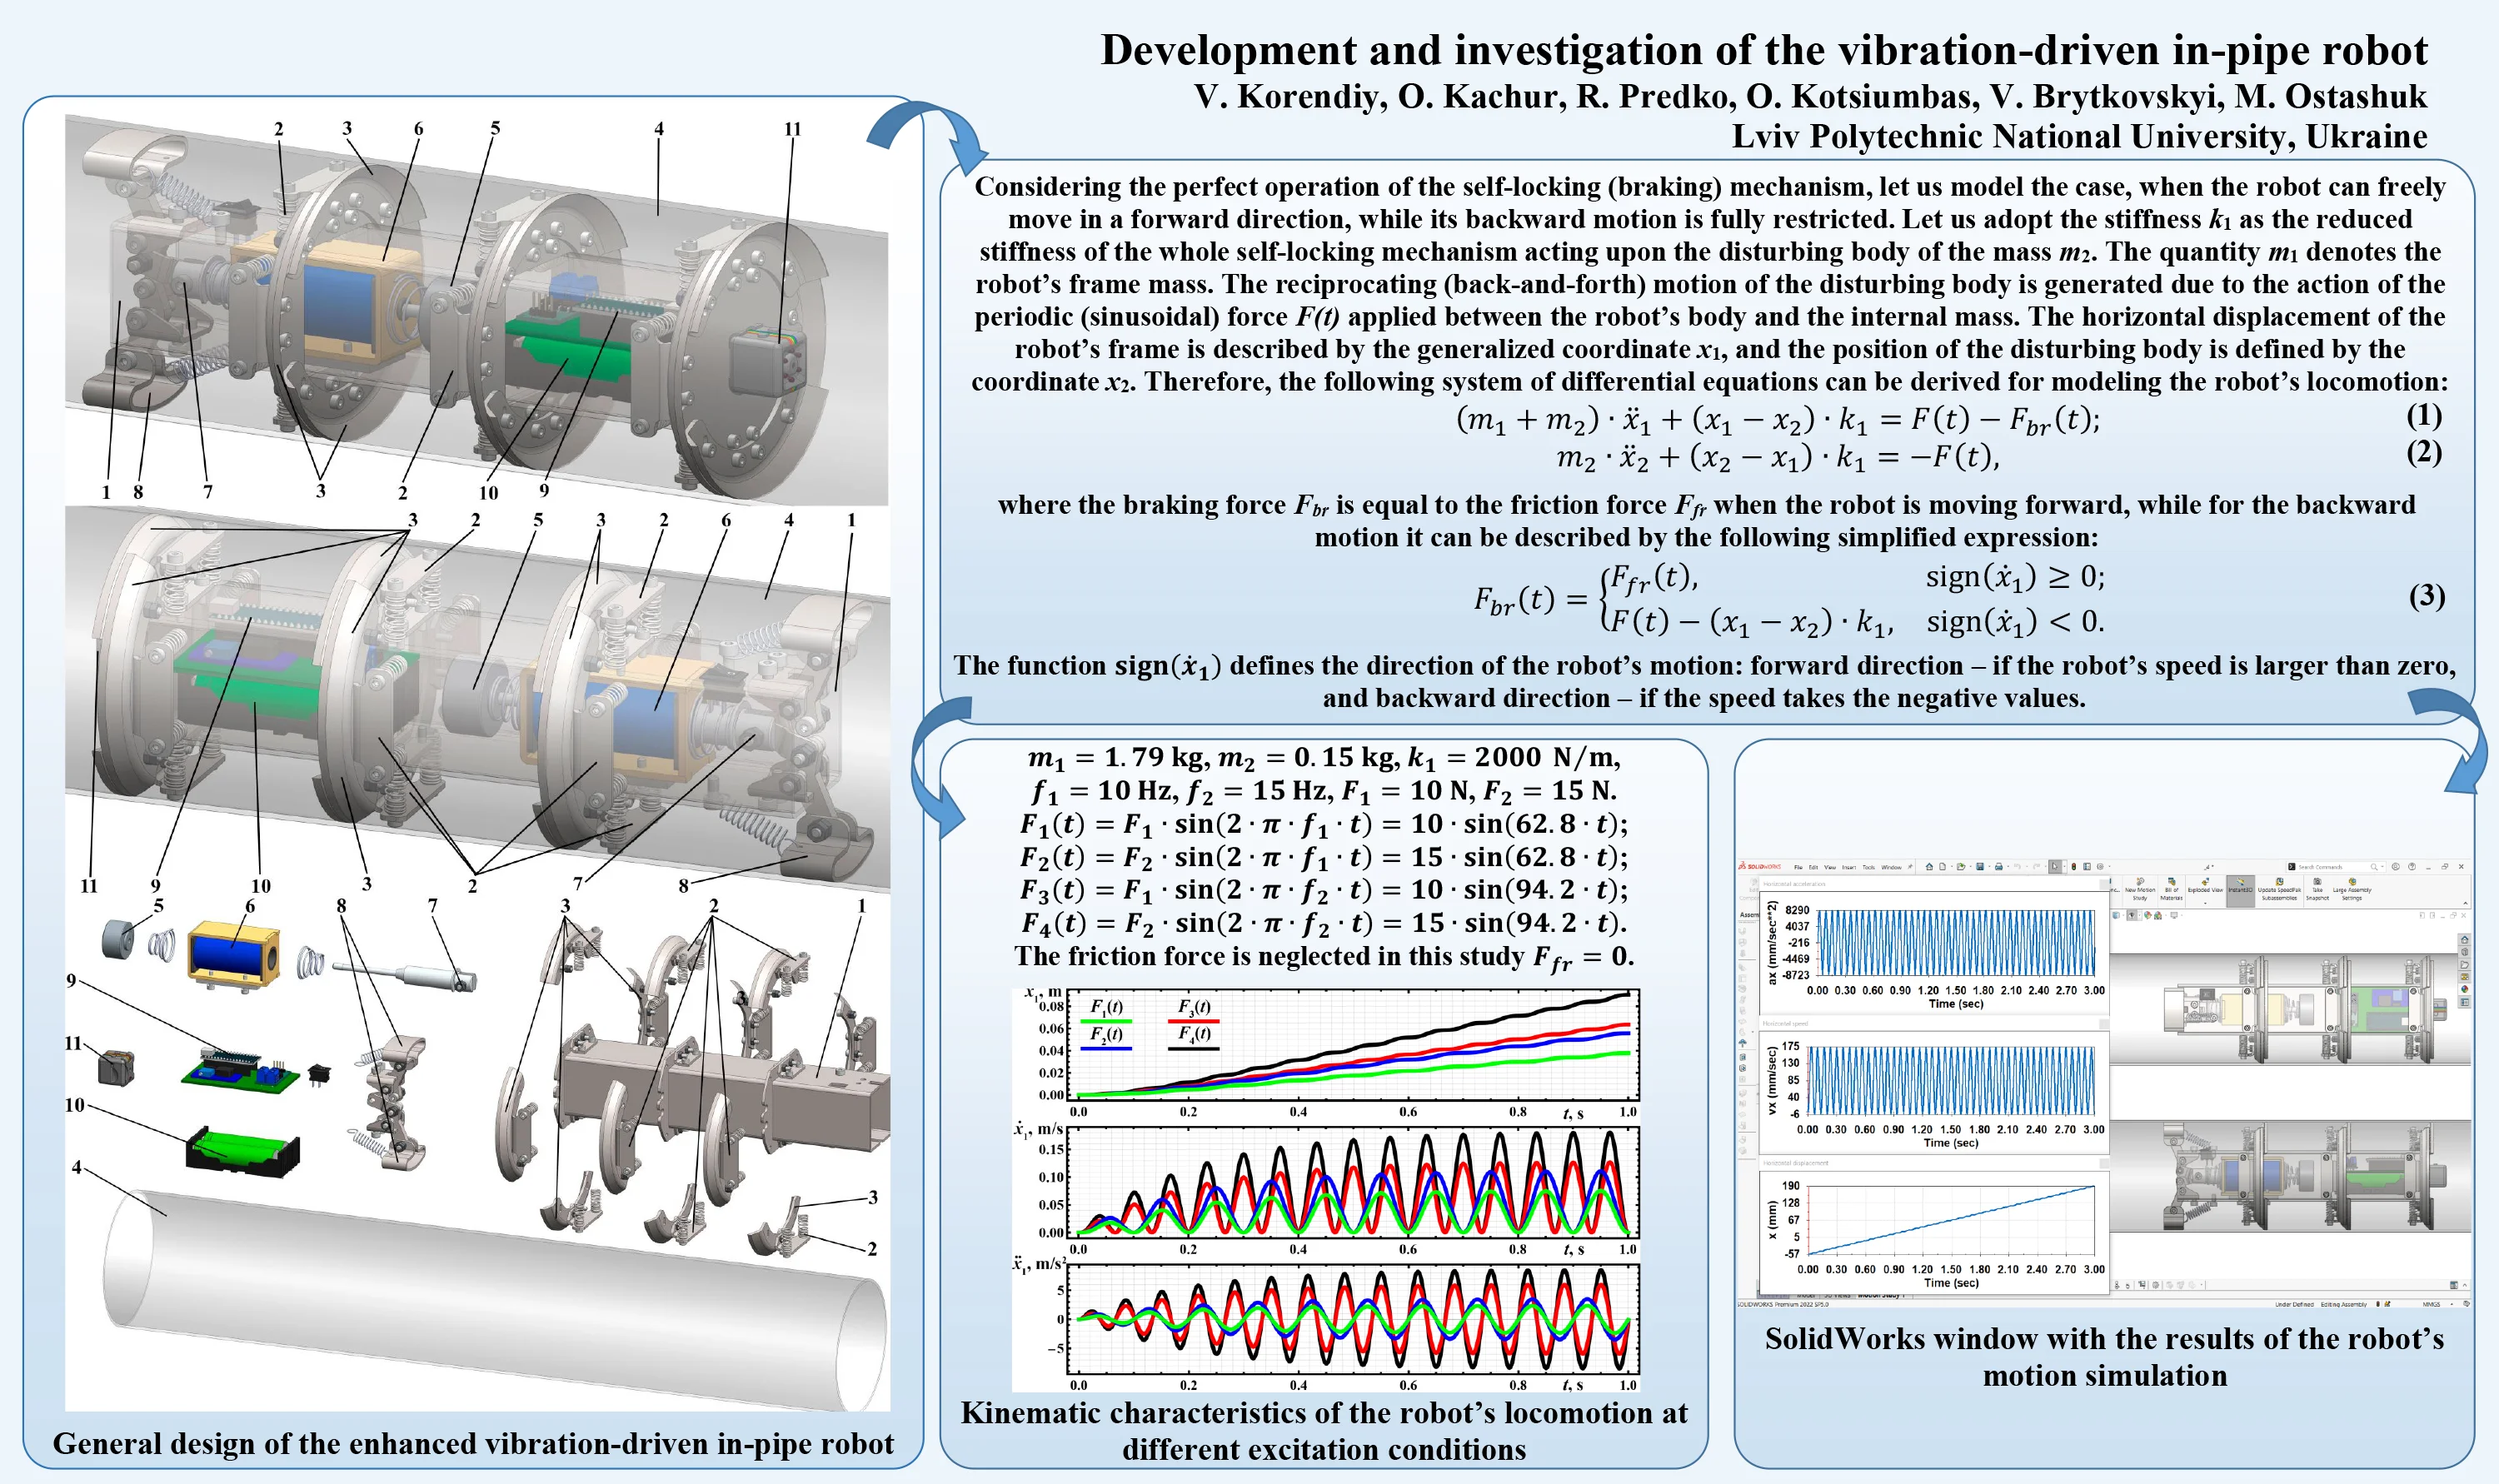 Development and investigation of the vibration-driven in-pipe robot